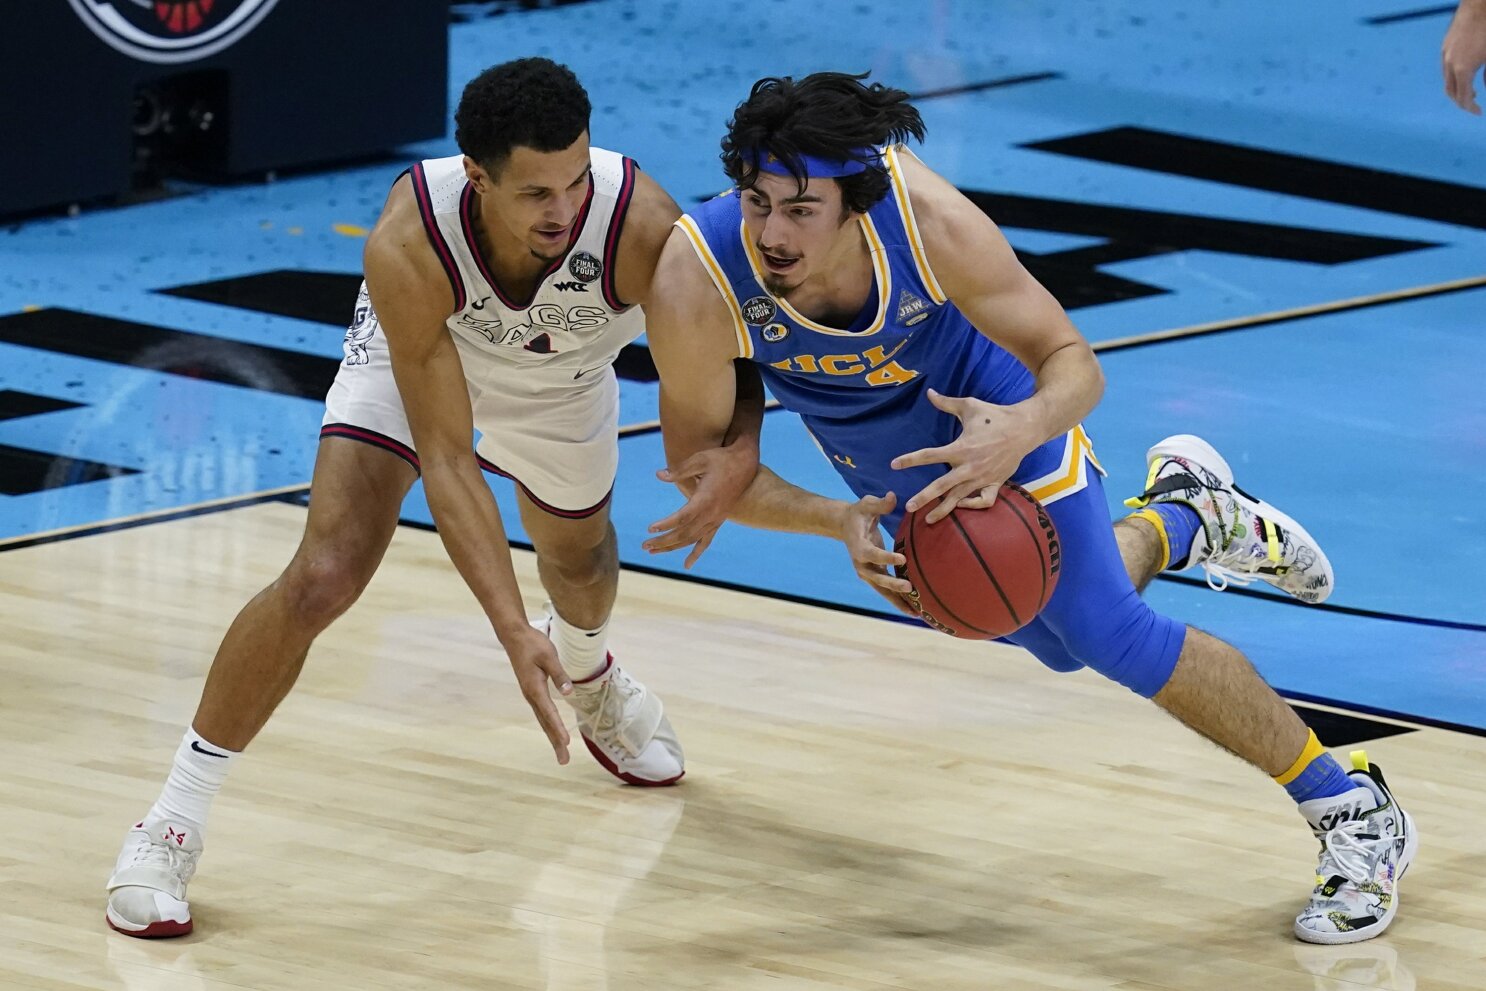 UCLA's Johnny Juzang reunited with brother at Final Four